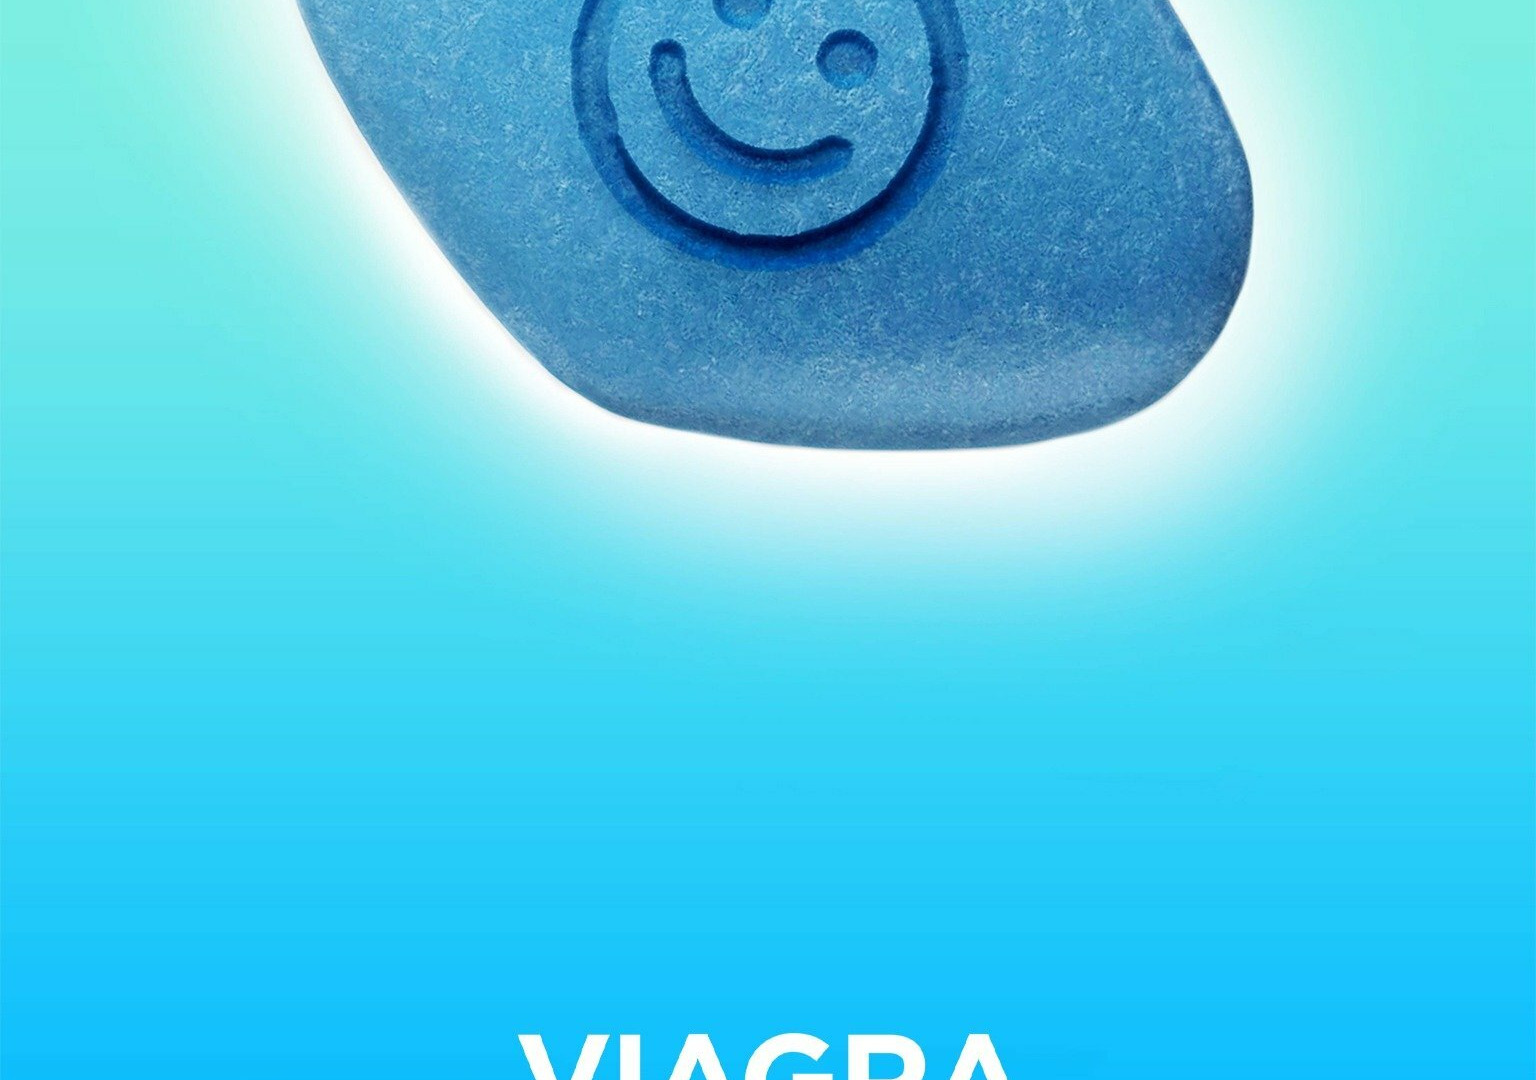 Show Viagra: The Little Blue Pill That Changed the World